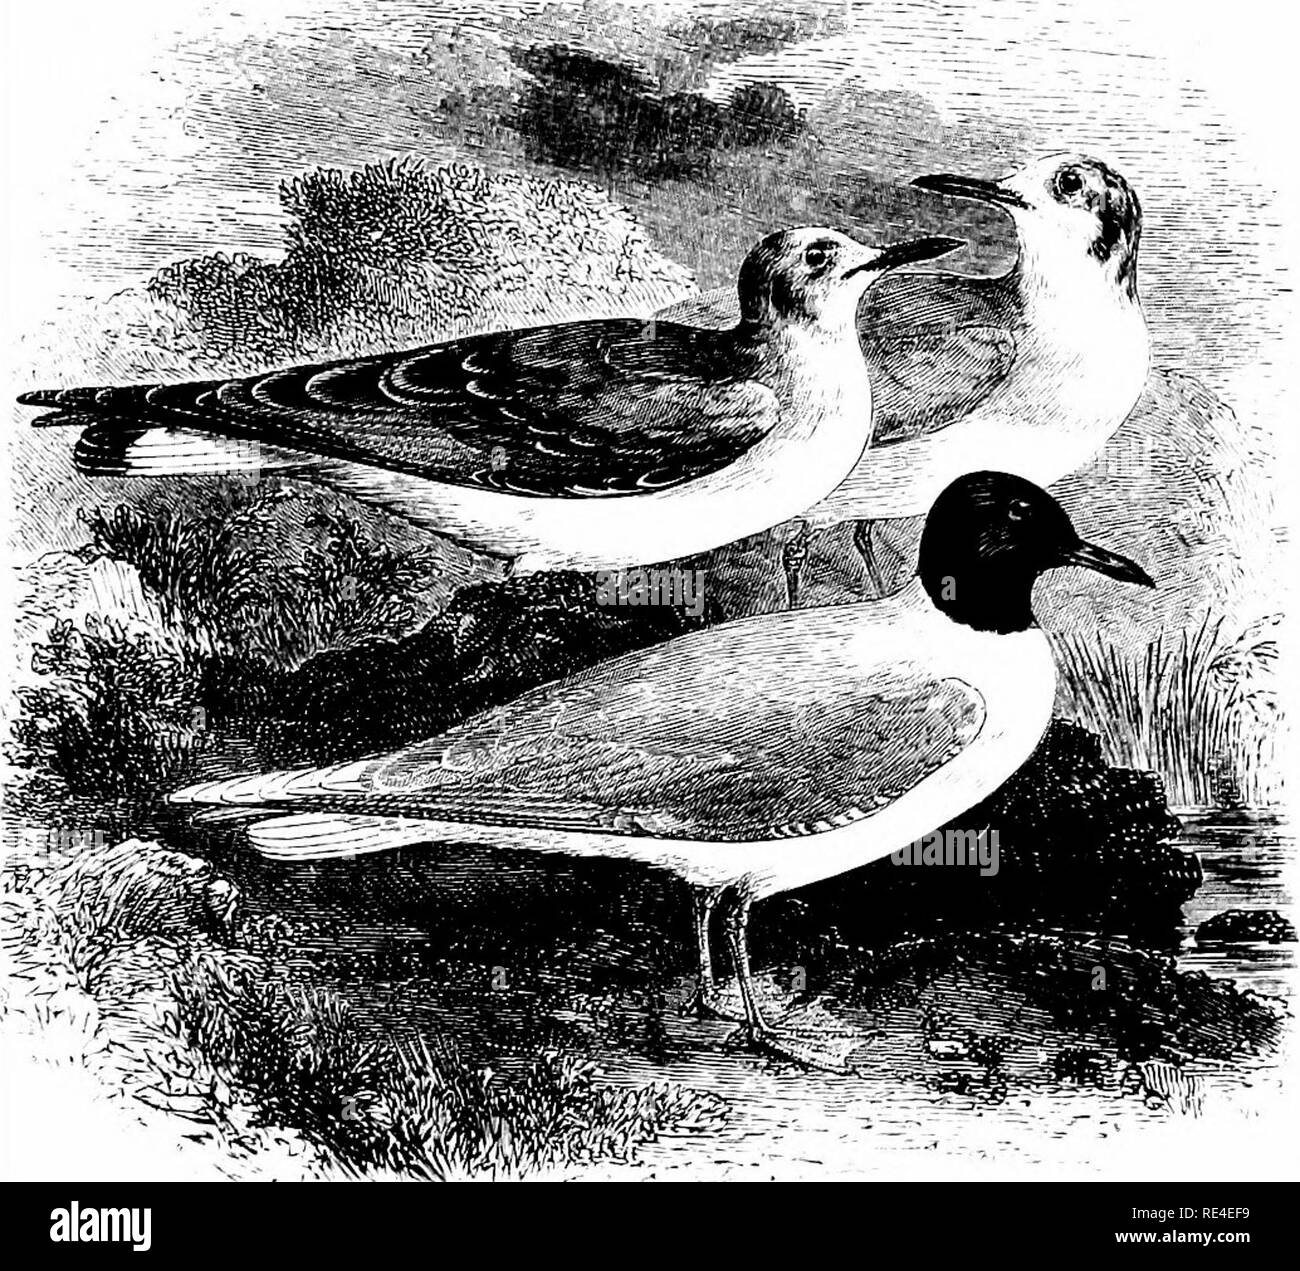 . An illustrated manual of British birds. Birds. LARIDjIi. 663. THE LITTLE GULL. Larus MiNUTUS, Pallas. This species, the smallest member of the genus, was introduced to the British list by Montagu, who described and figured a young bird shot near Chelsea prior to 1813. Subsequently specimens have frequently been obtained, while in 1866, and again in 1868, Little Gulls appeared on the coast of Yorkshire in numbers till then un- precedented ; though these were far exceeded along the entire east side of England during the winter of 1869, and again after the heavy easterly gales of February 1870, Stock Photo